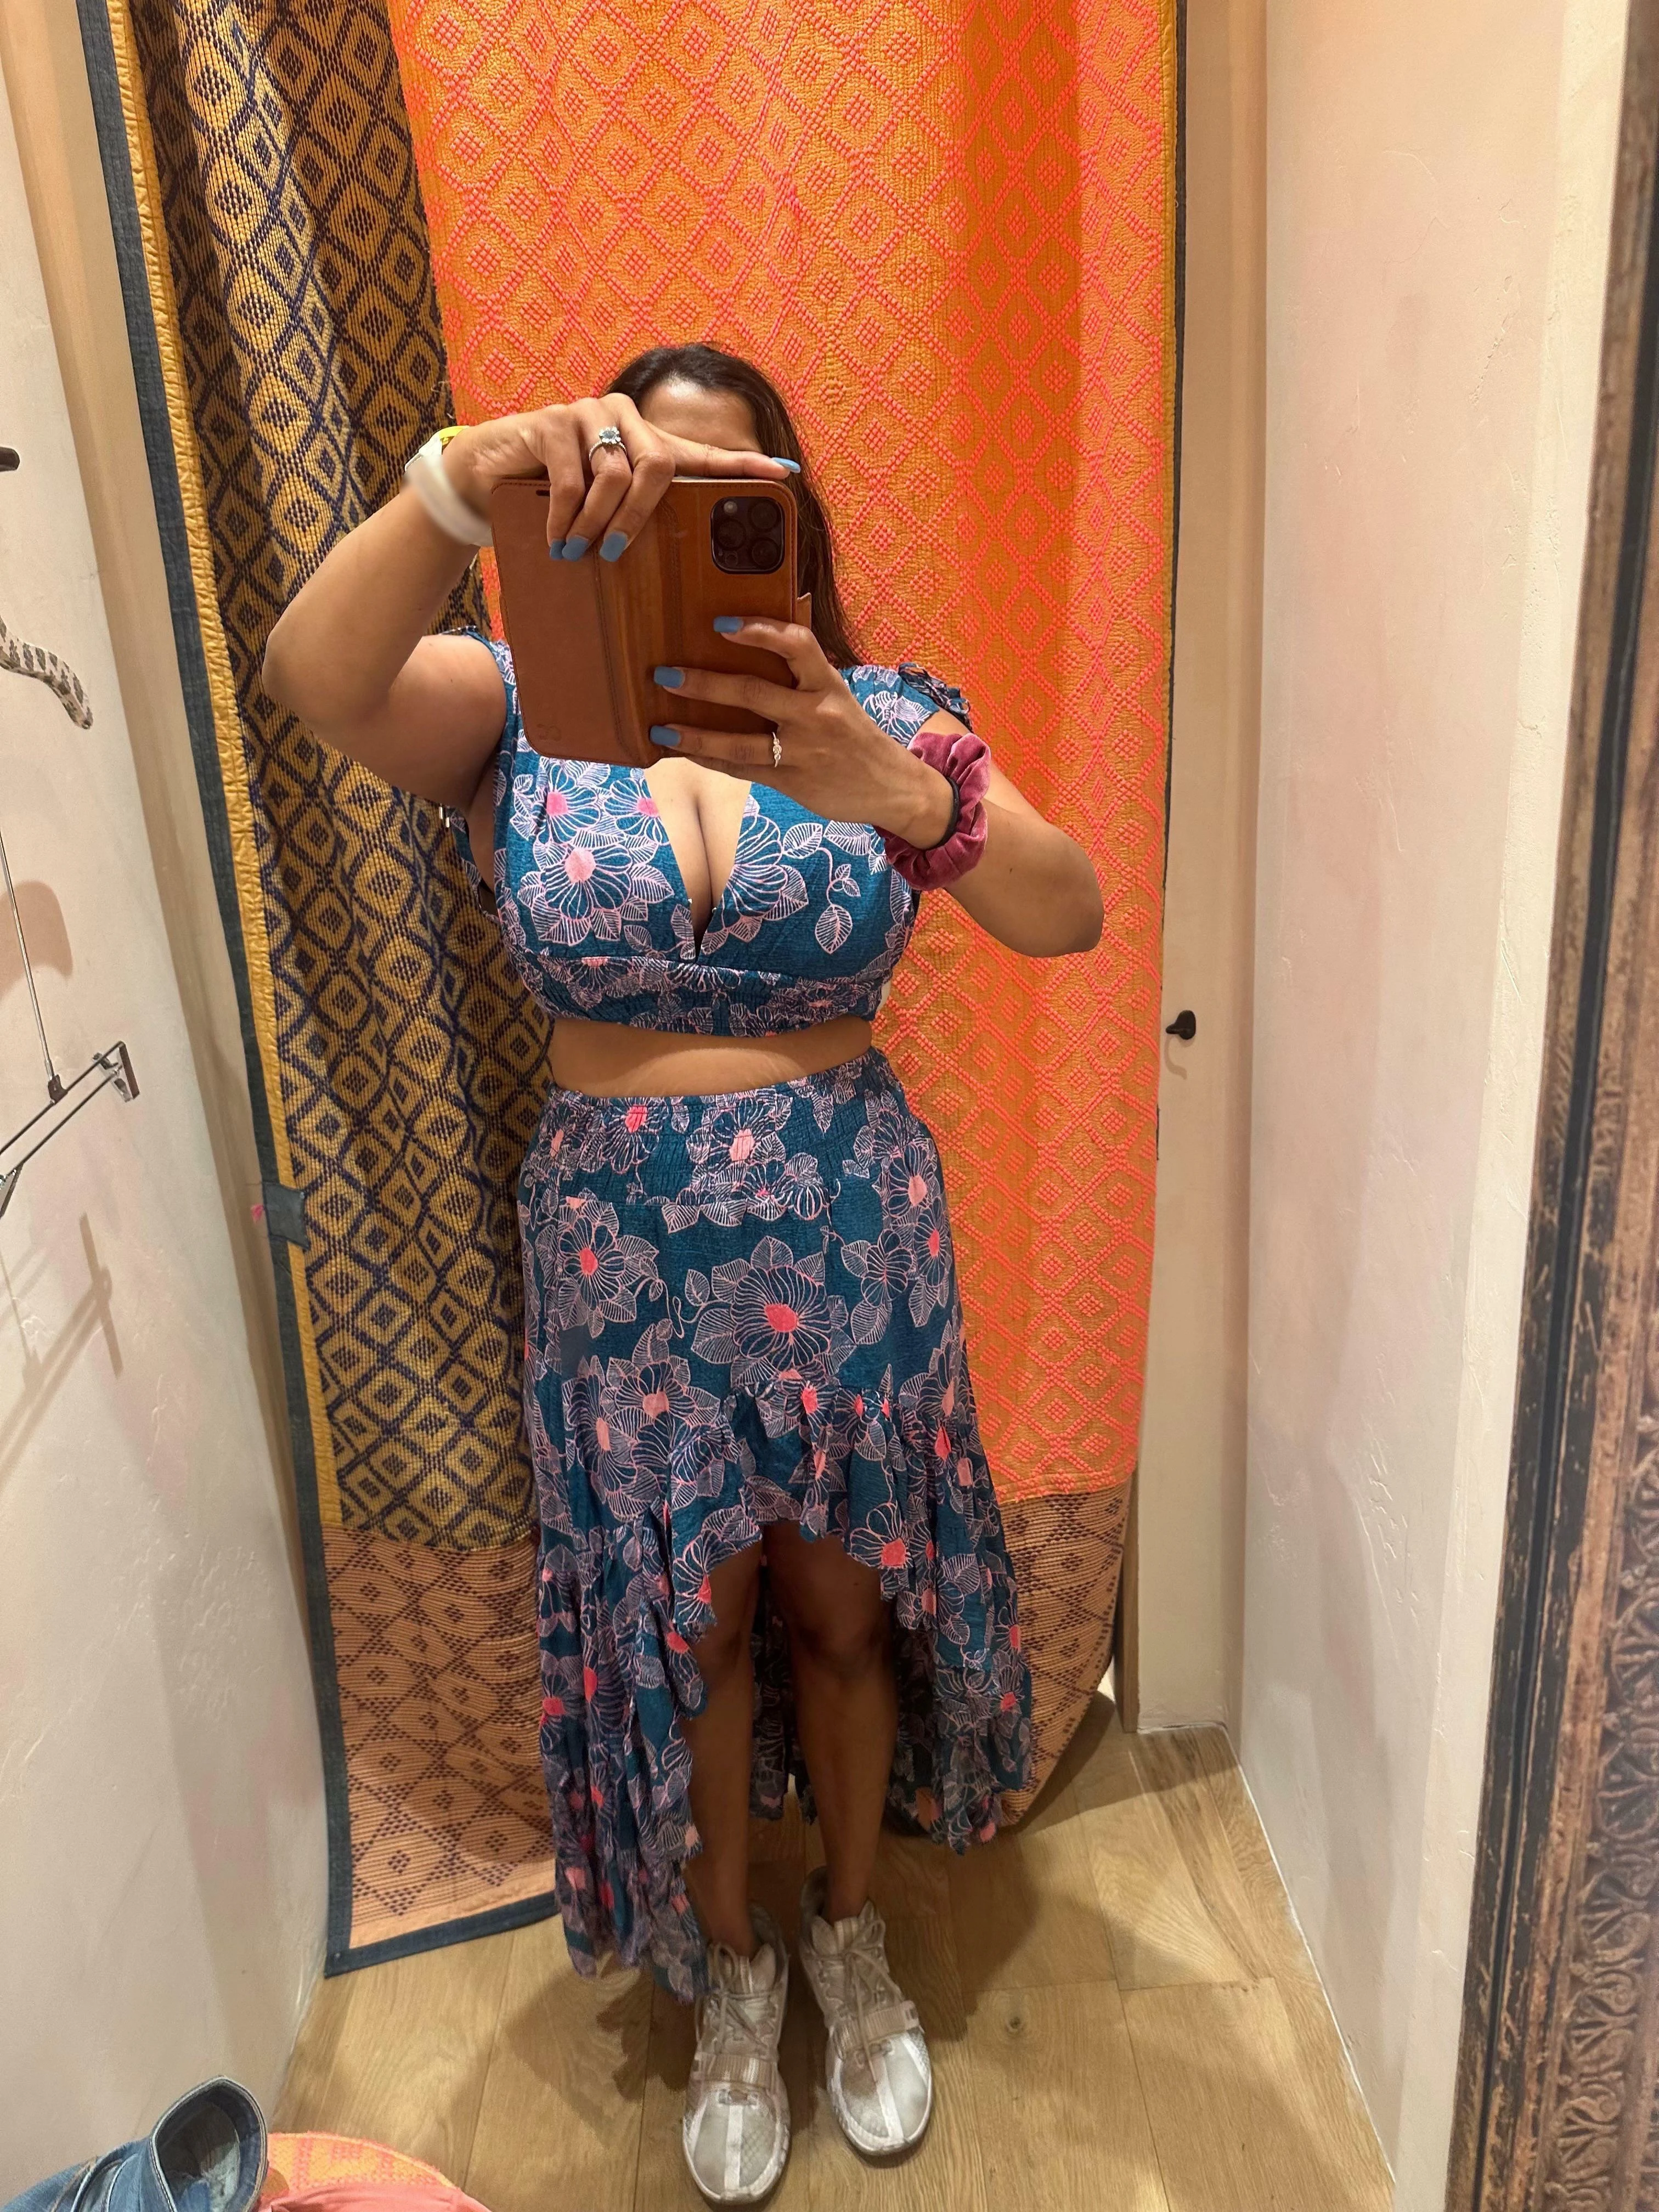 Fitting room fun. Buy or not??